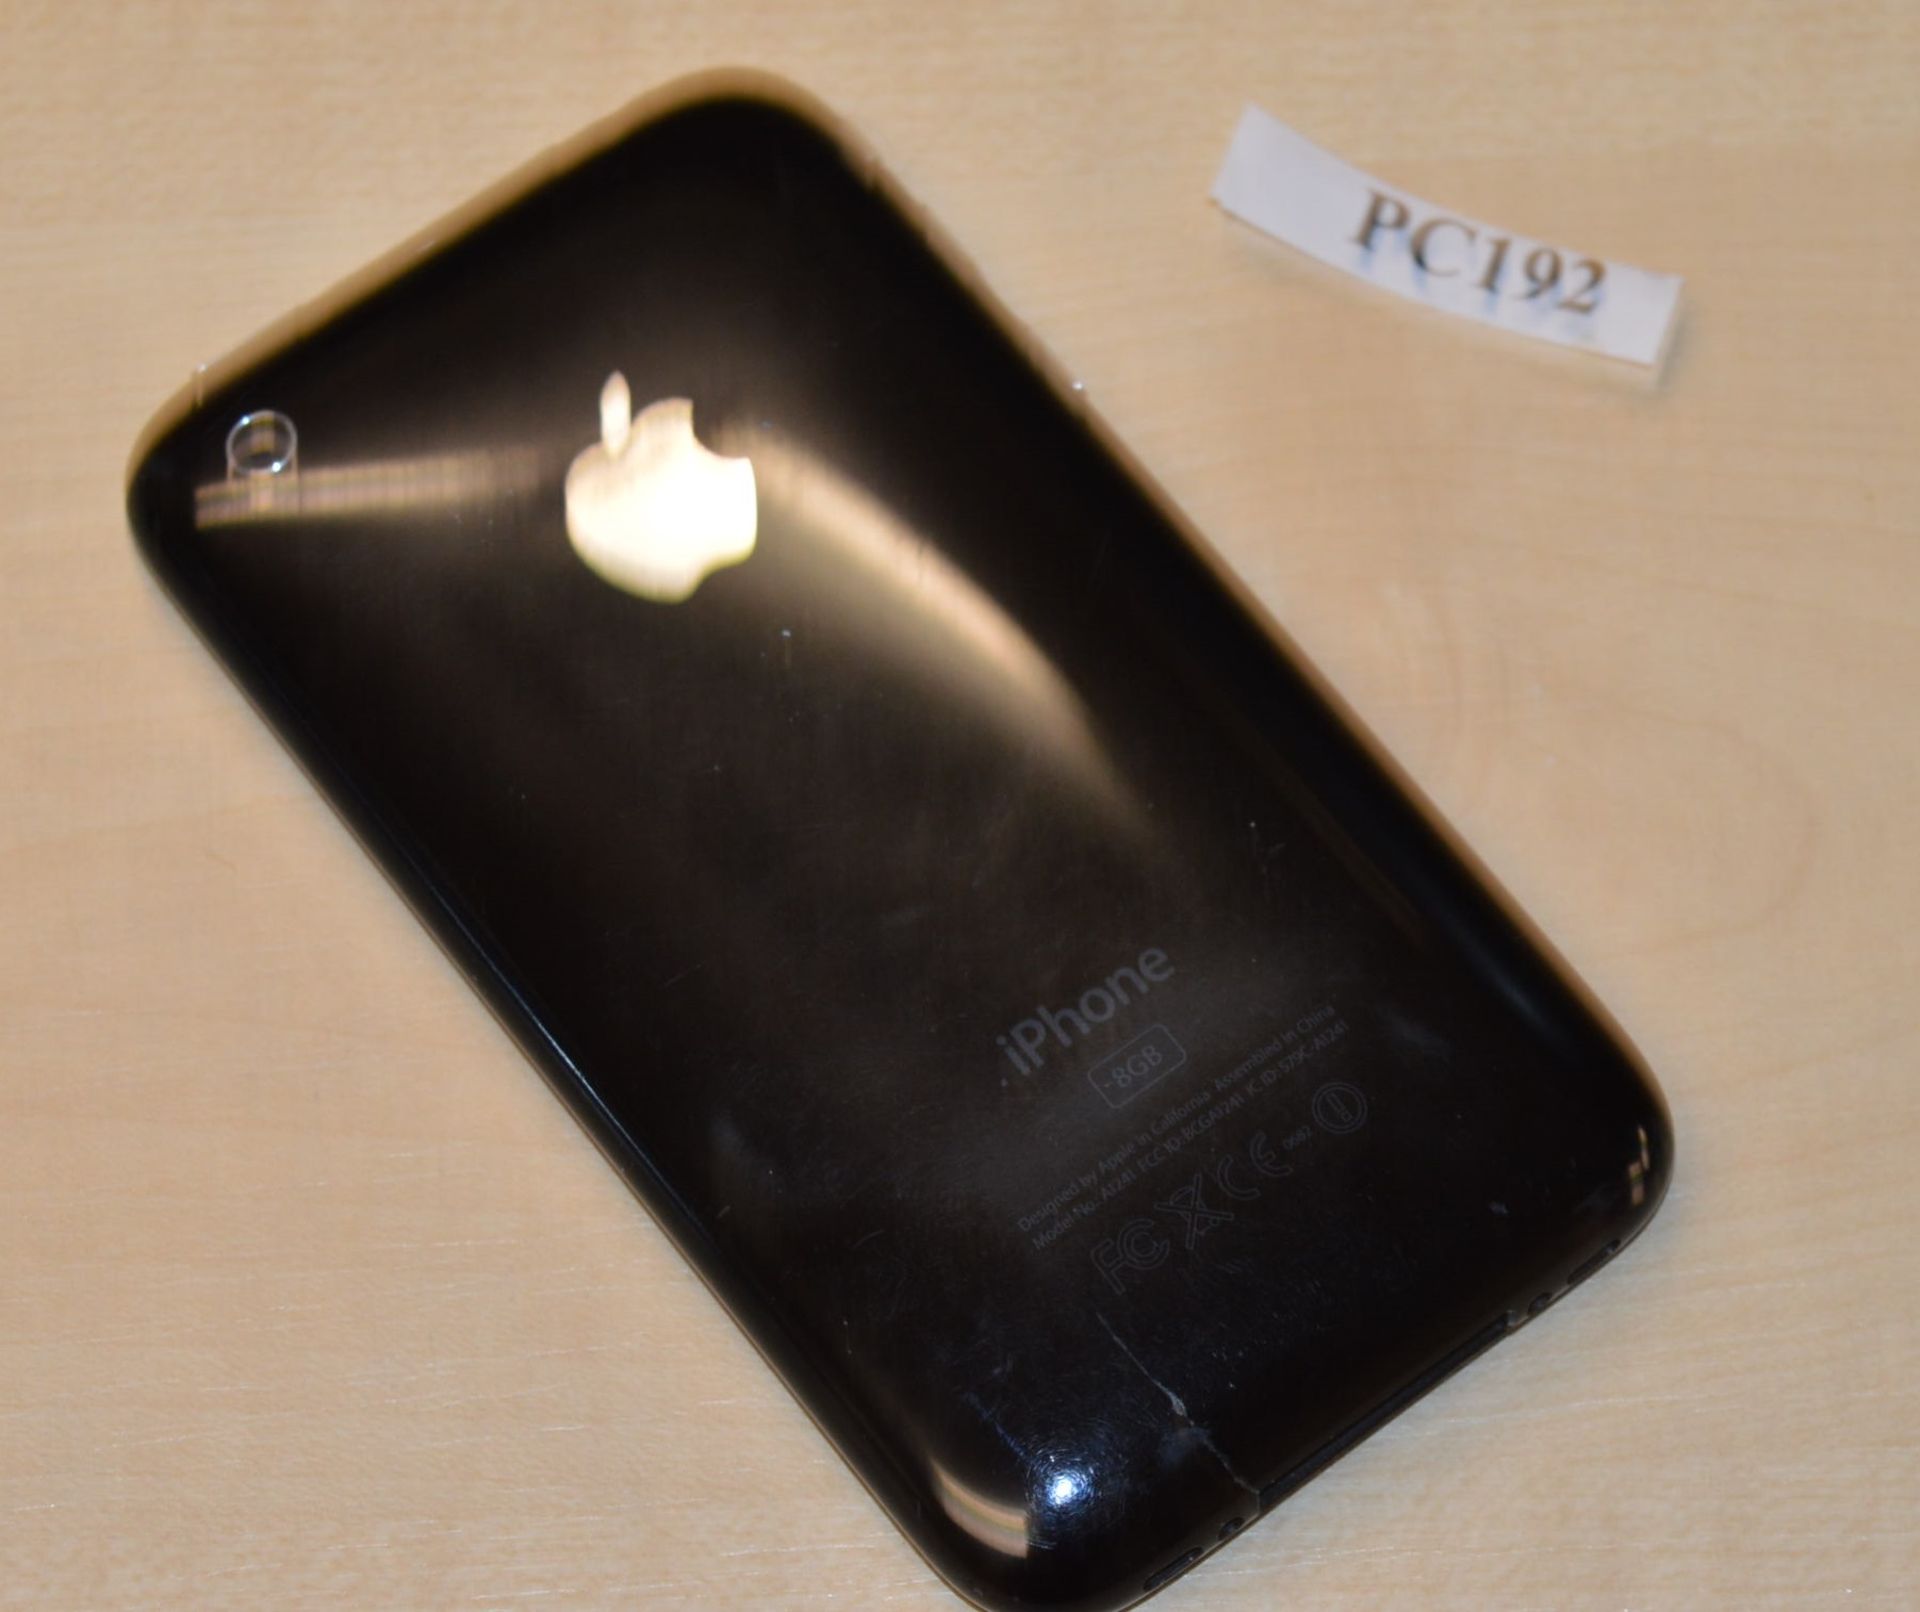 1 x Apple Iphone 3G 8GB Mobile Phone Handset - CL300 - Ref PC192 - Location: Altrincham WA14 - - Image 2 of 2